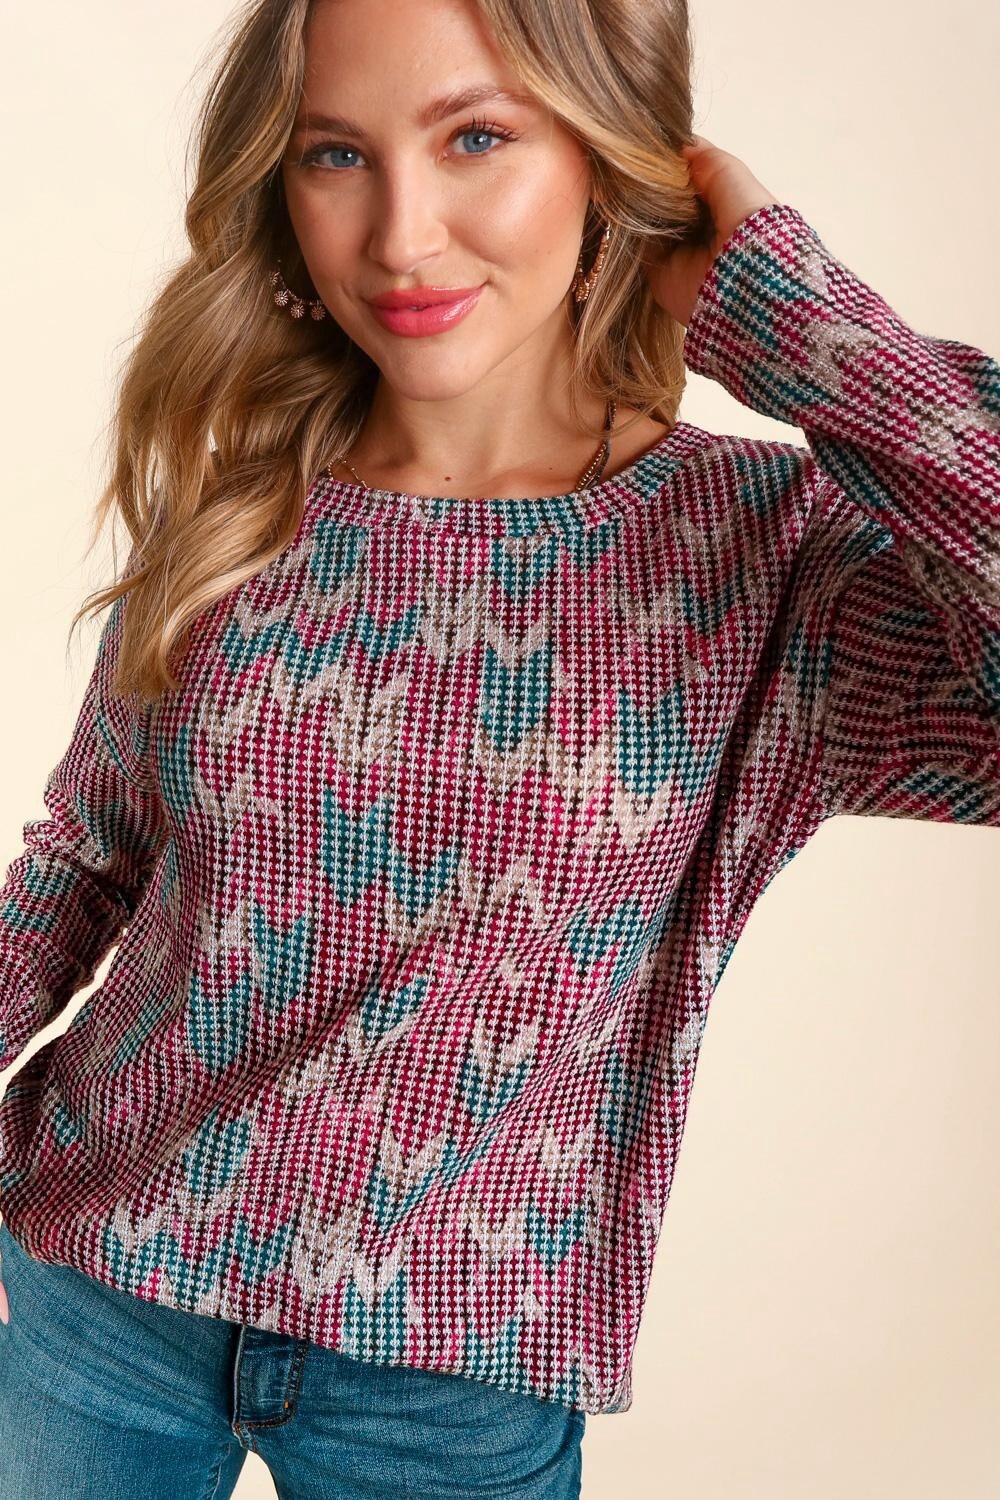 MULTICOLOR TWO TONE LONG SLEEVE SWEATER TOP, Size: Small, Colour: Magenta/Teal